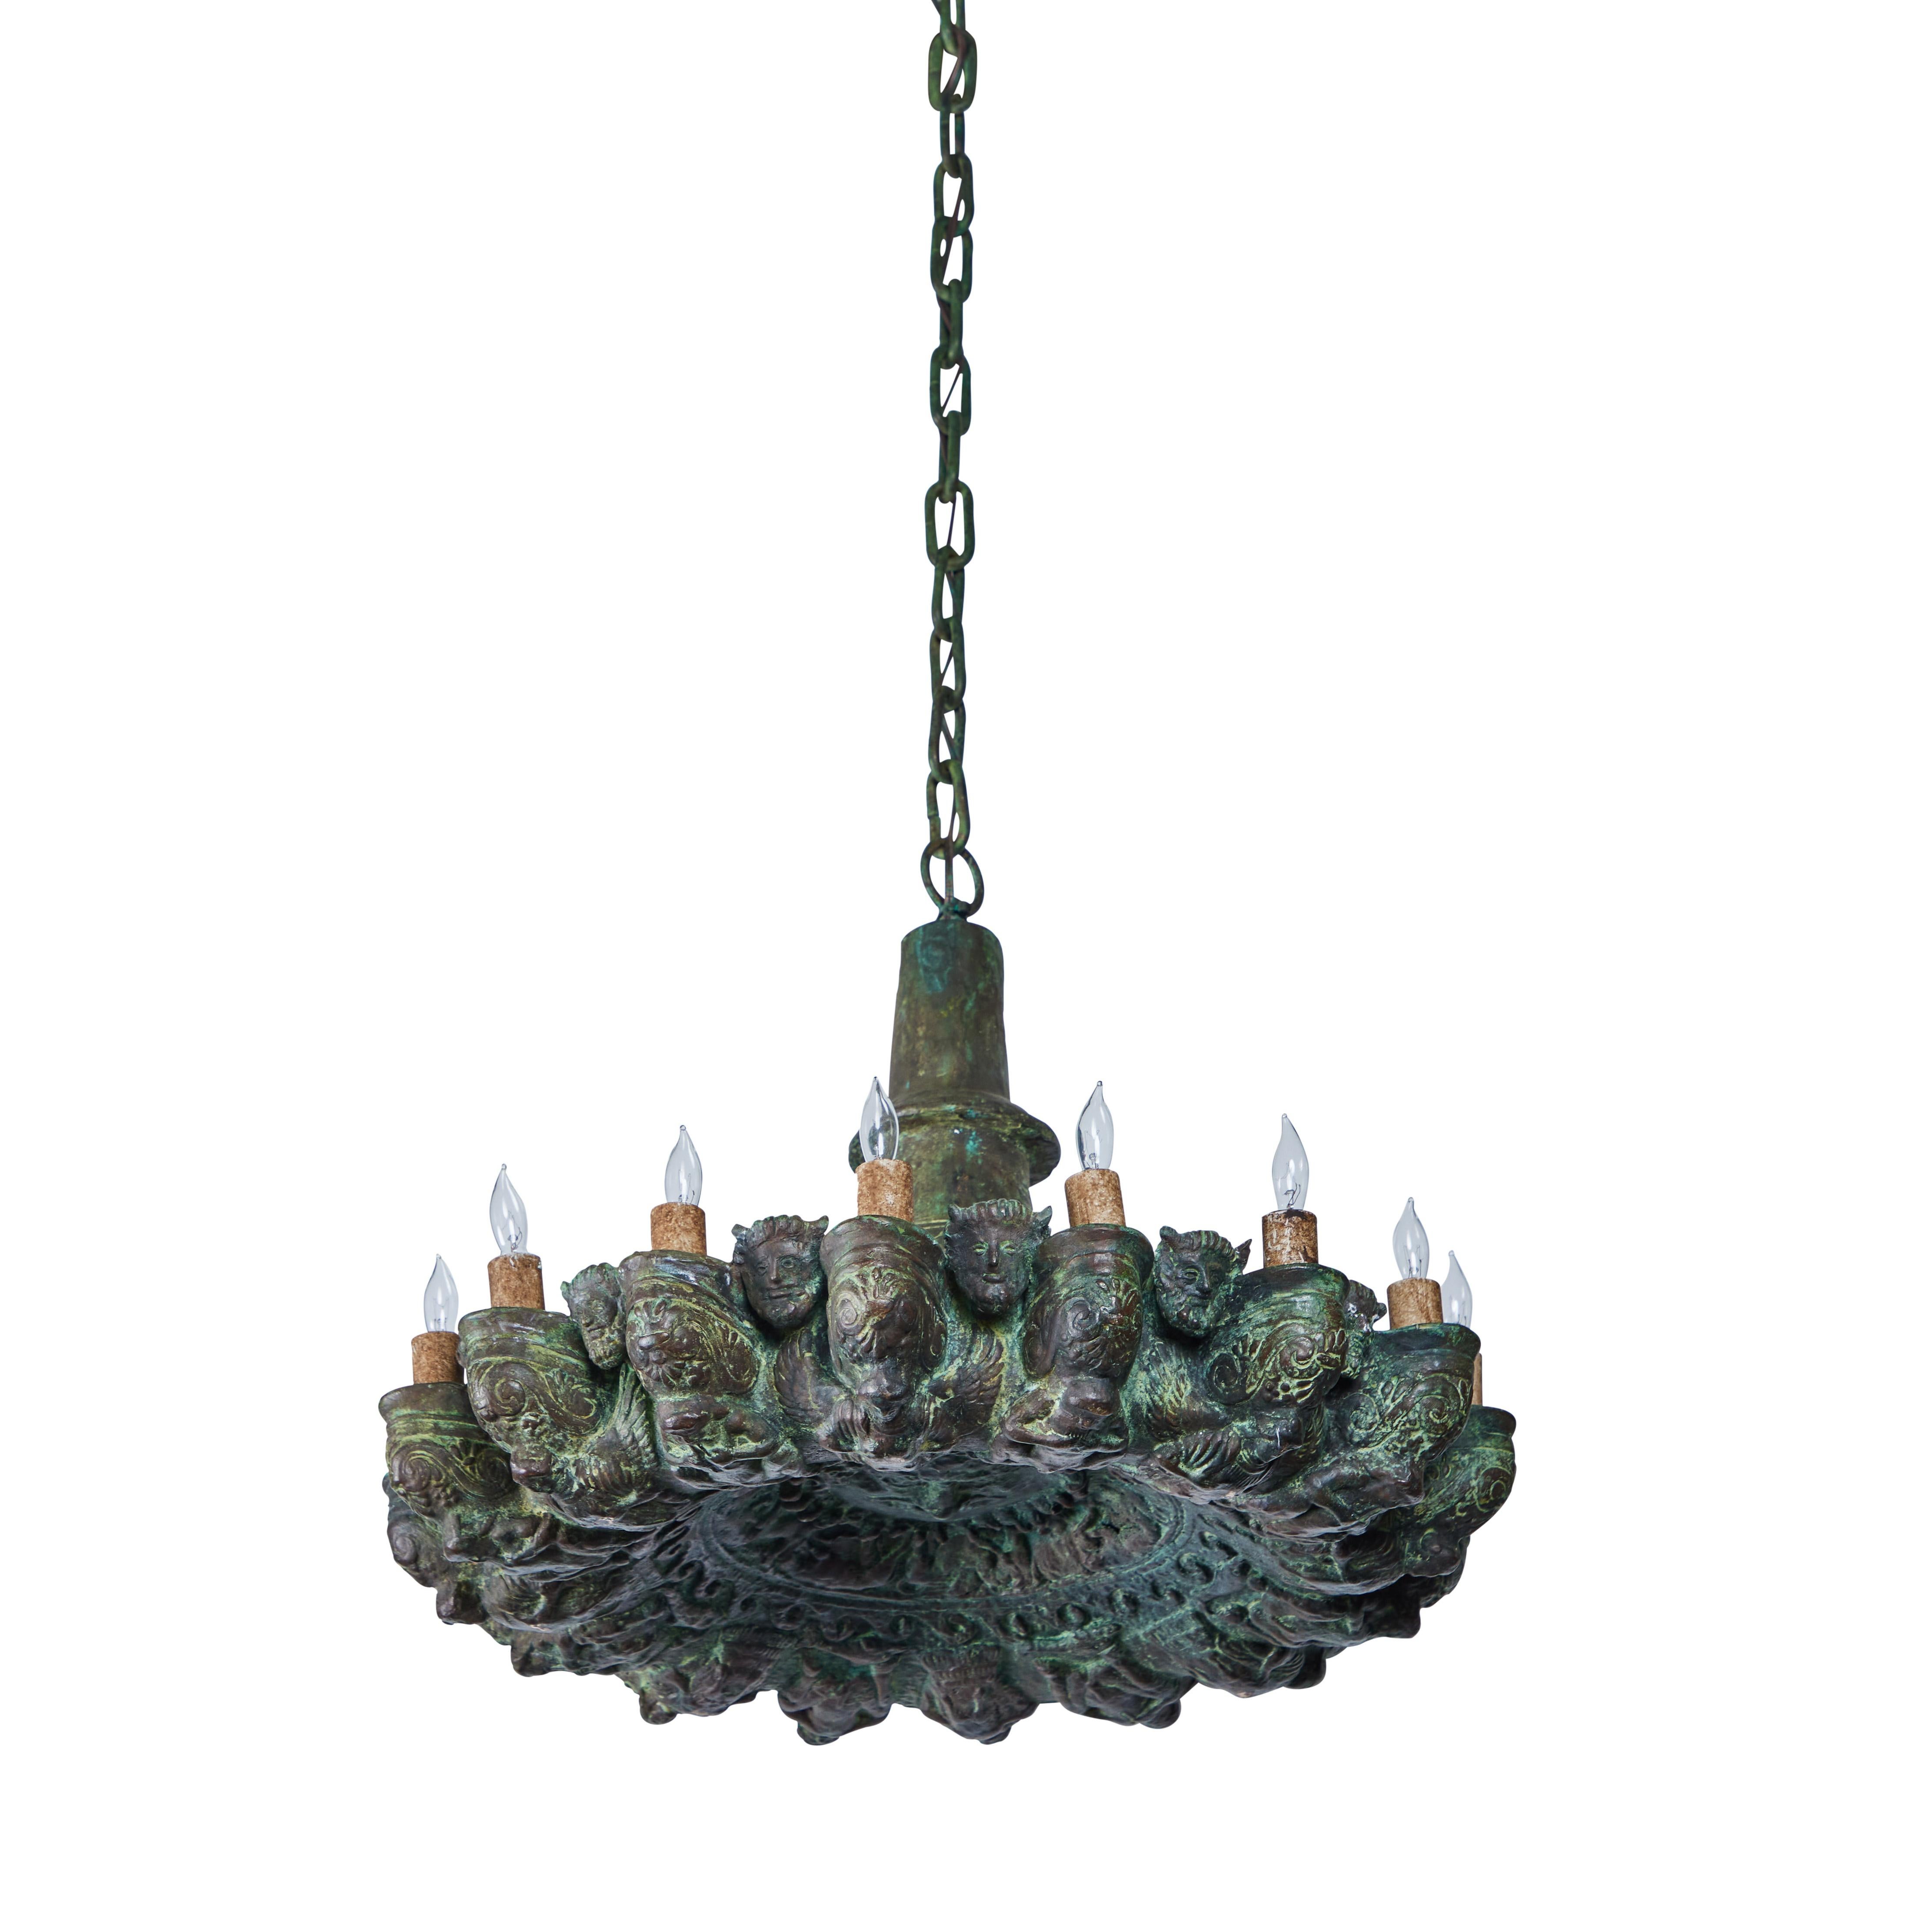 A cast verdigris bronze reproduction of a Roman gas light featuring mythological figures and monkeys. Center medallion is a stylized figural sun.               
26